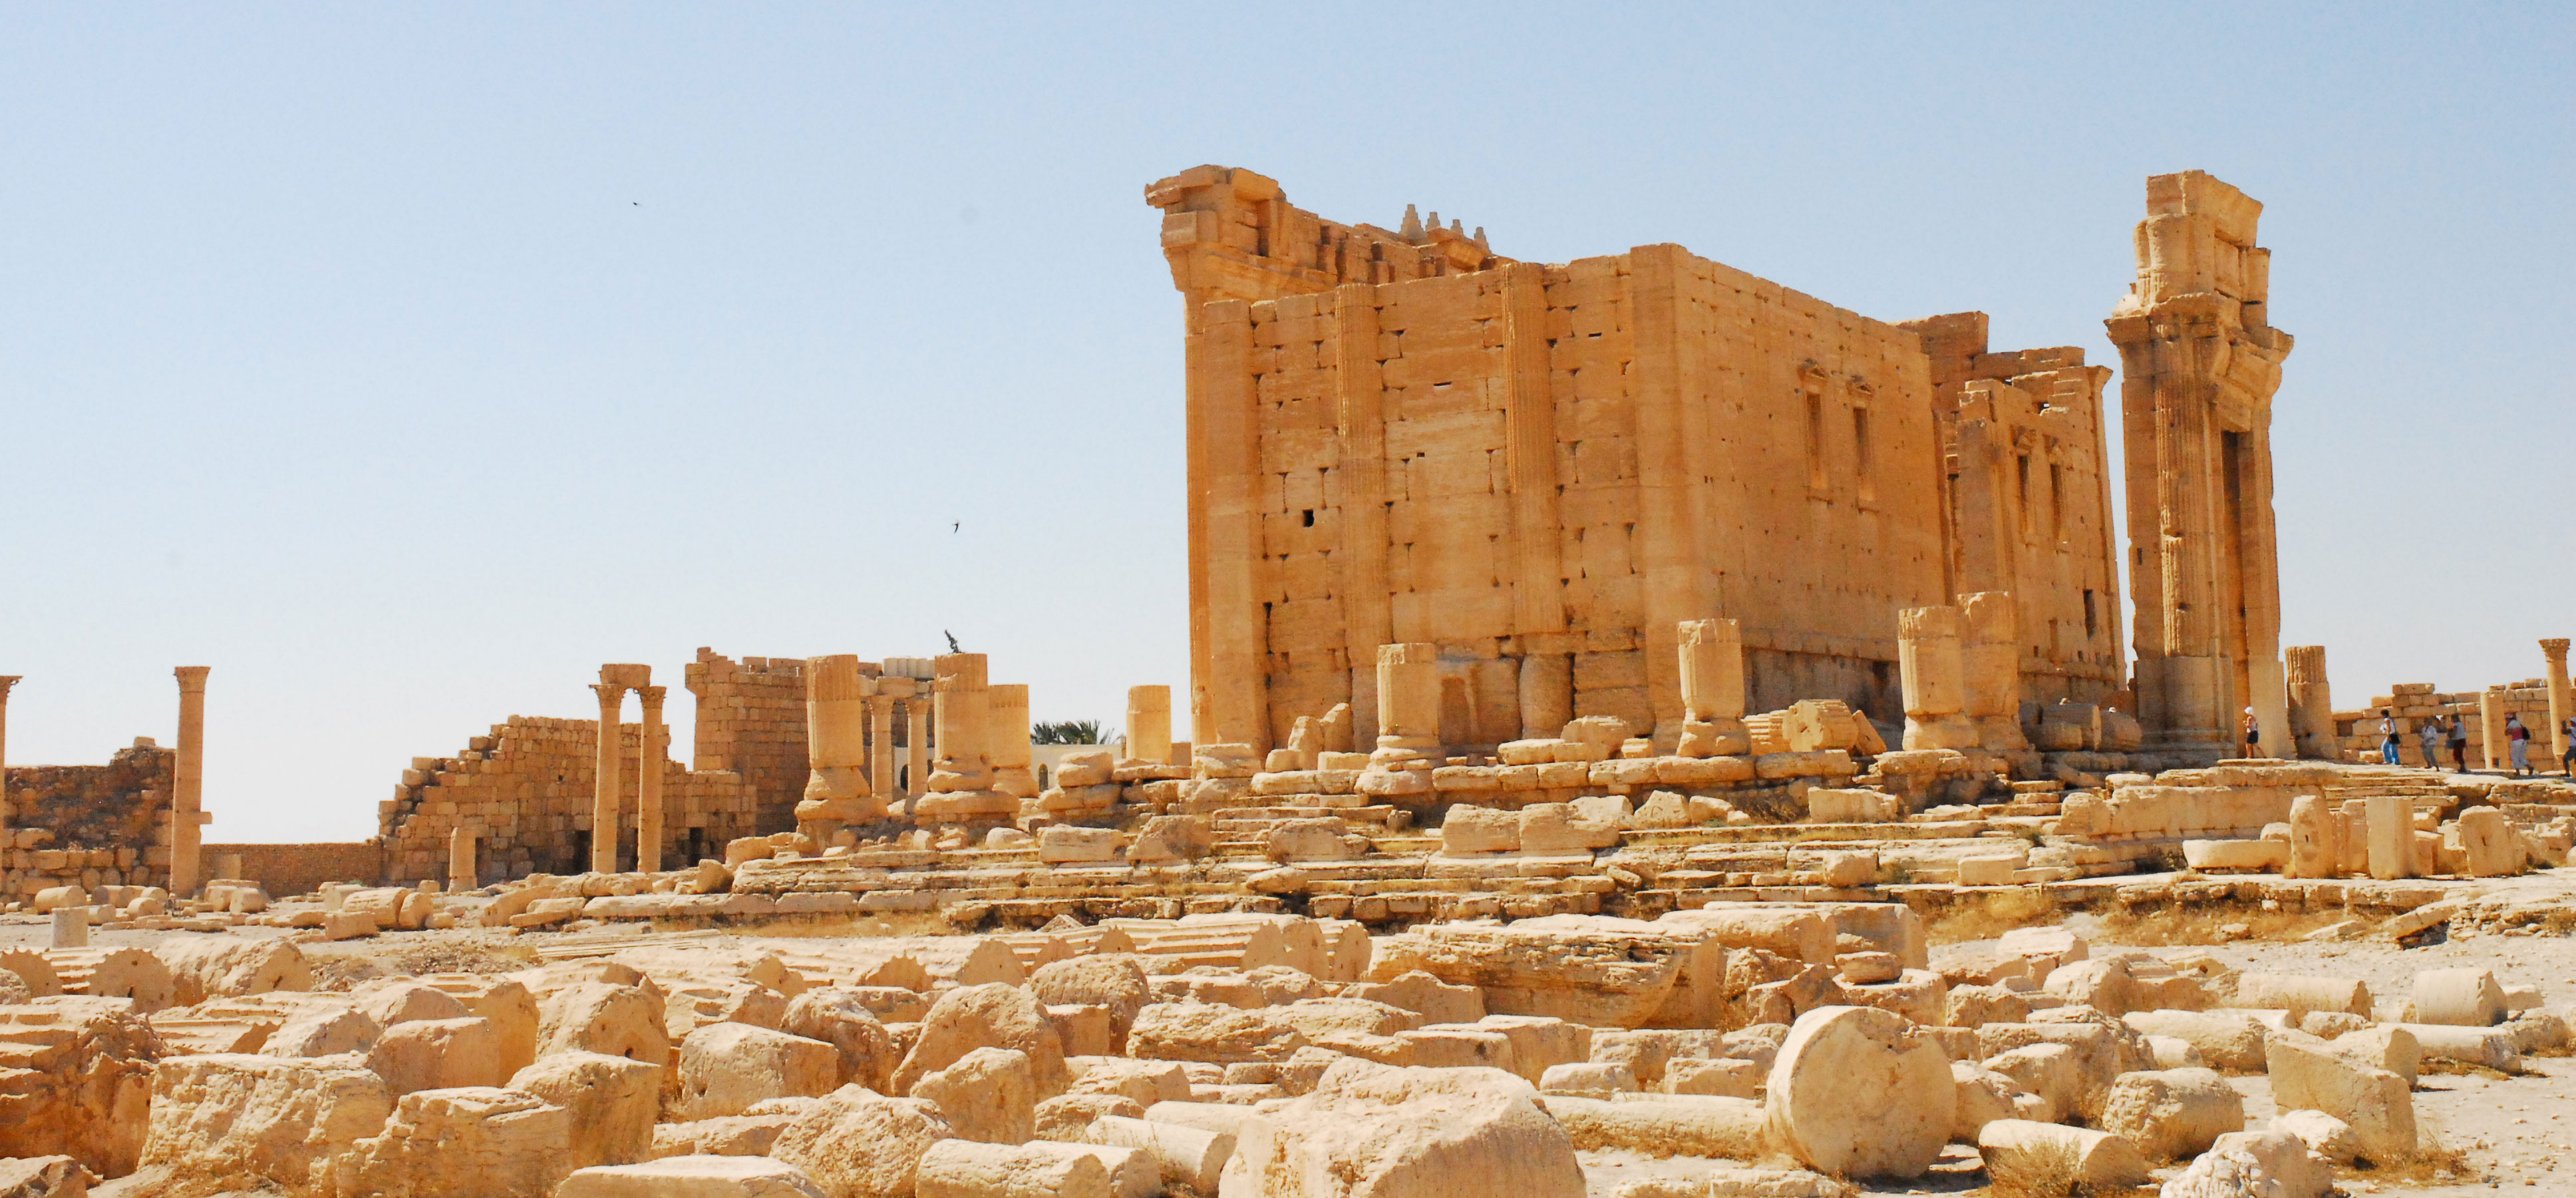 Islamic State (IS) Militants Destroyed The Tombs Of Ancient Palmyra’s Temple Of Bel